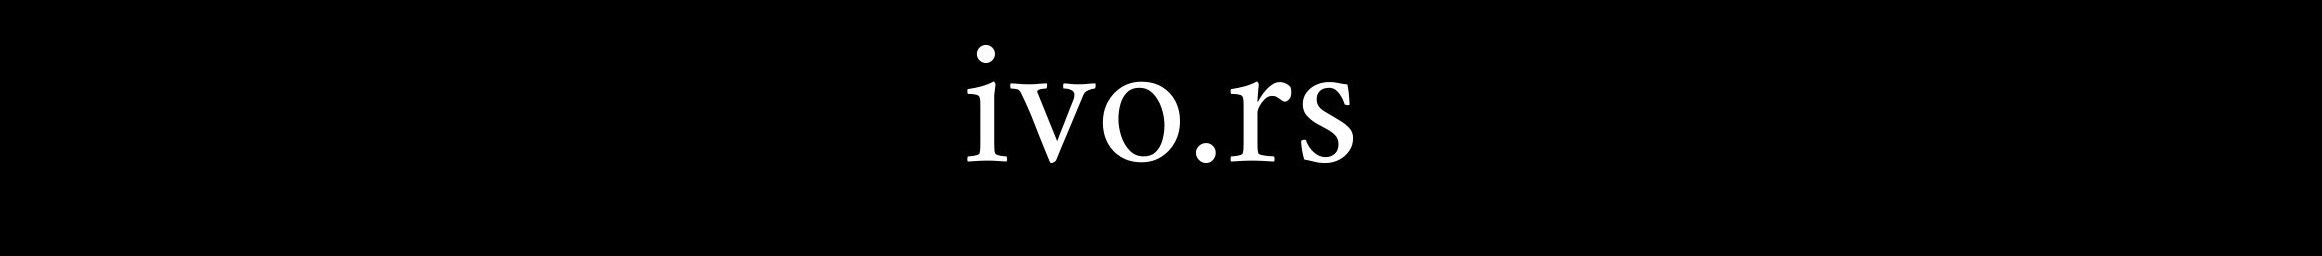 Ivo Rs's profile banner